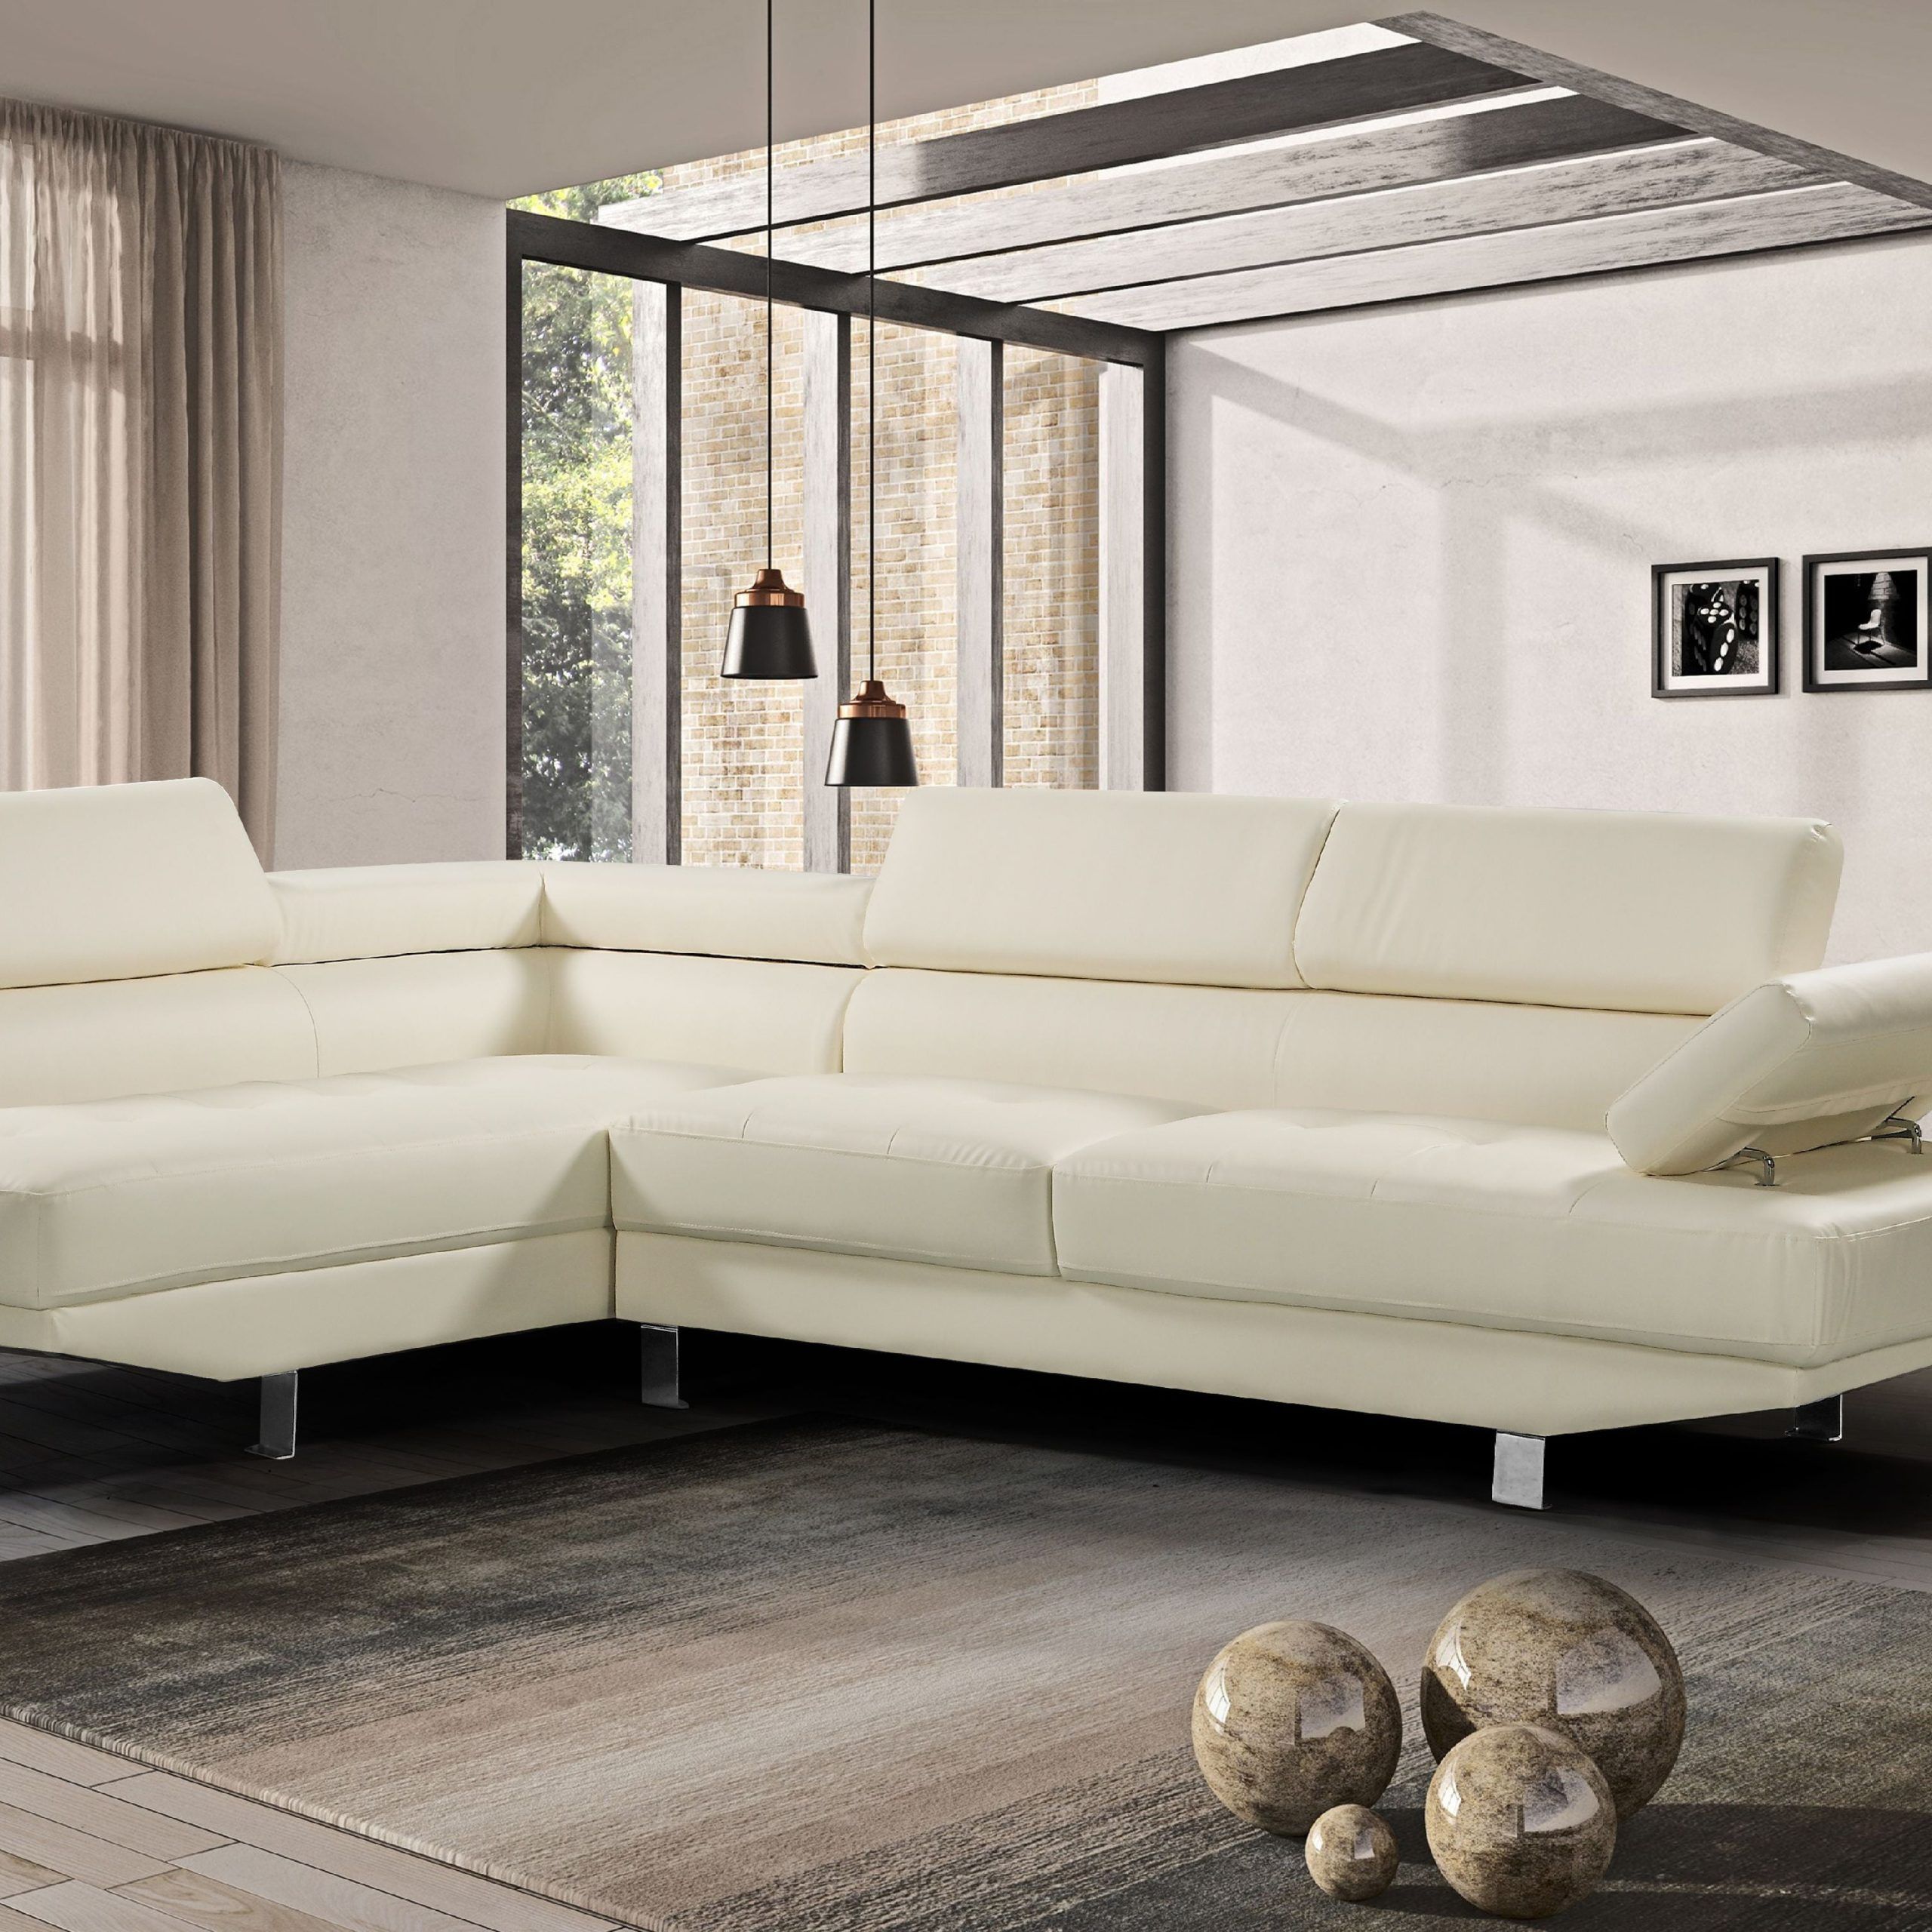 Trendy Harper&bright Designs Modern Faux Leather Sectional Sofa With Inside Faux Leather Sofas (Photo 11 of 15)